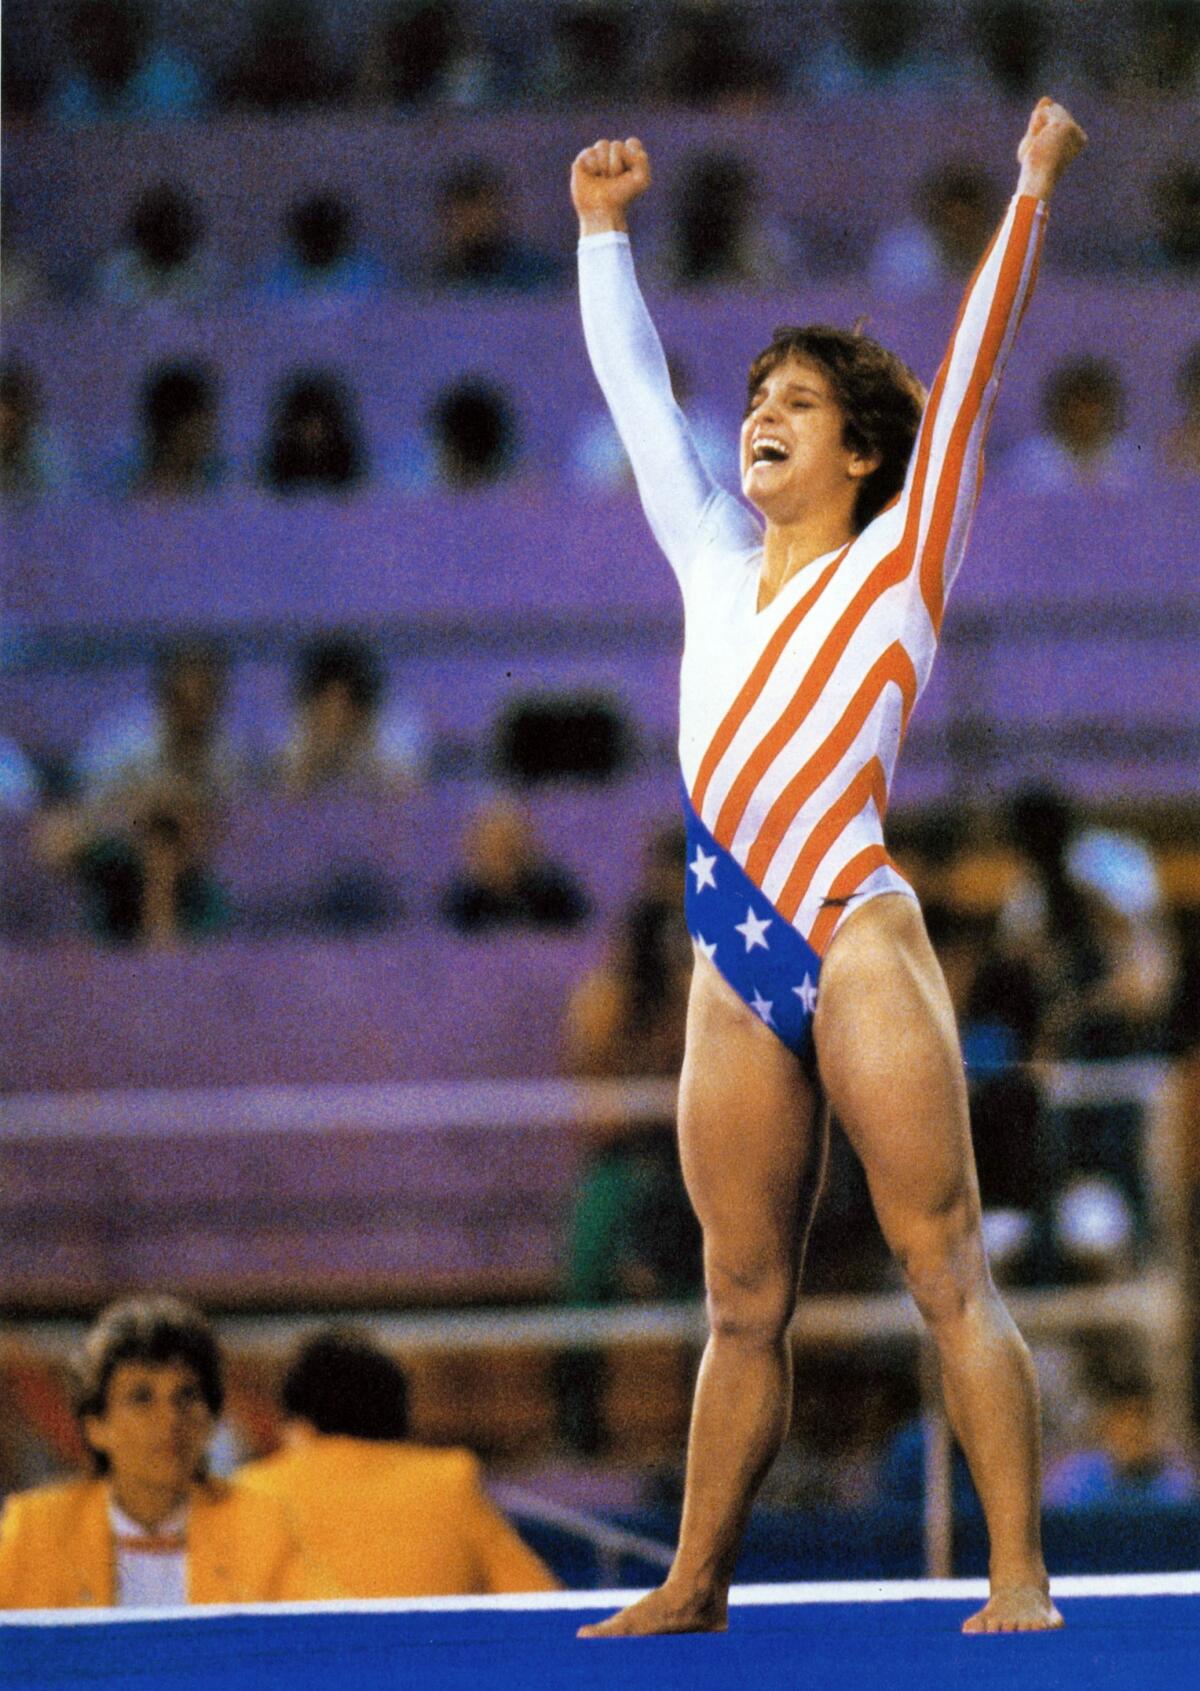 U.S. gymnast Mary Lou Retton celebrates after her gold-medal winning performance in 1984.